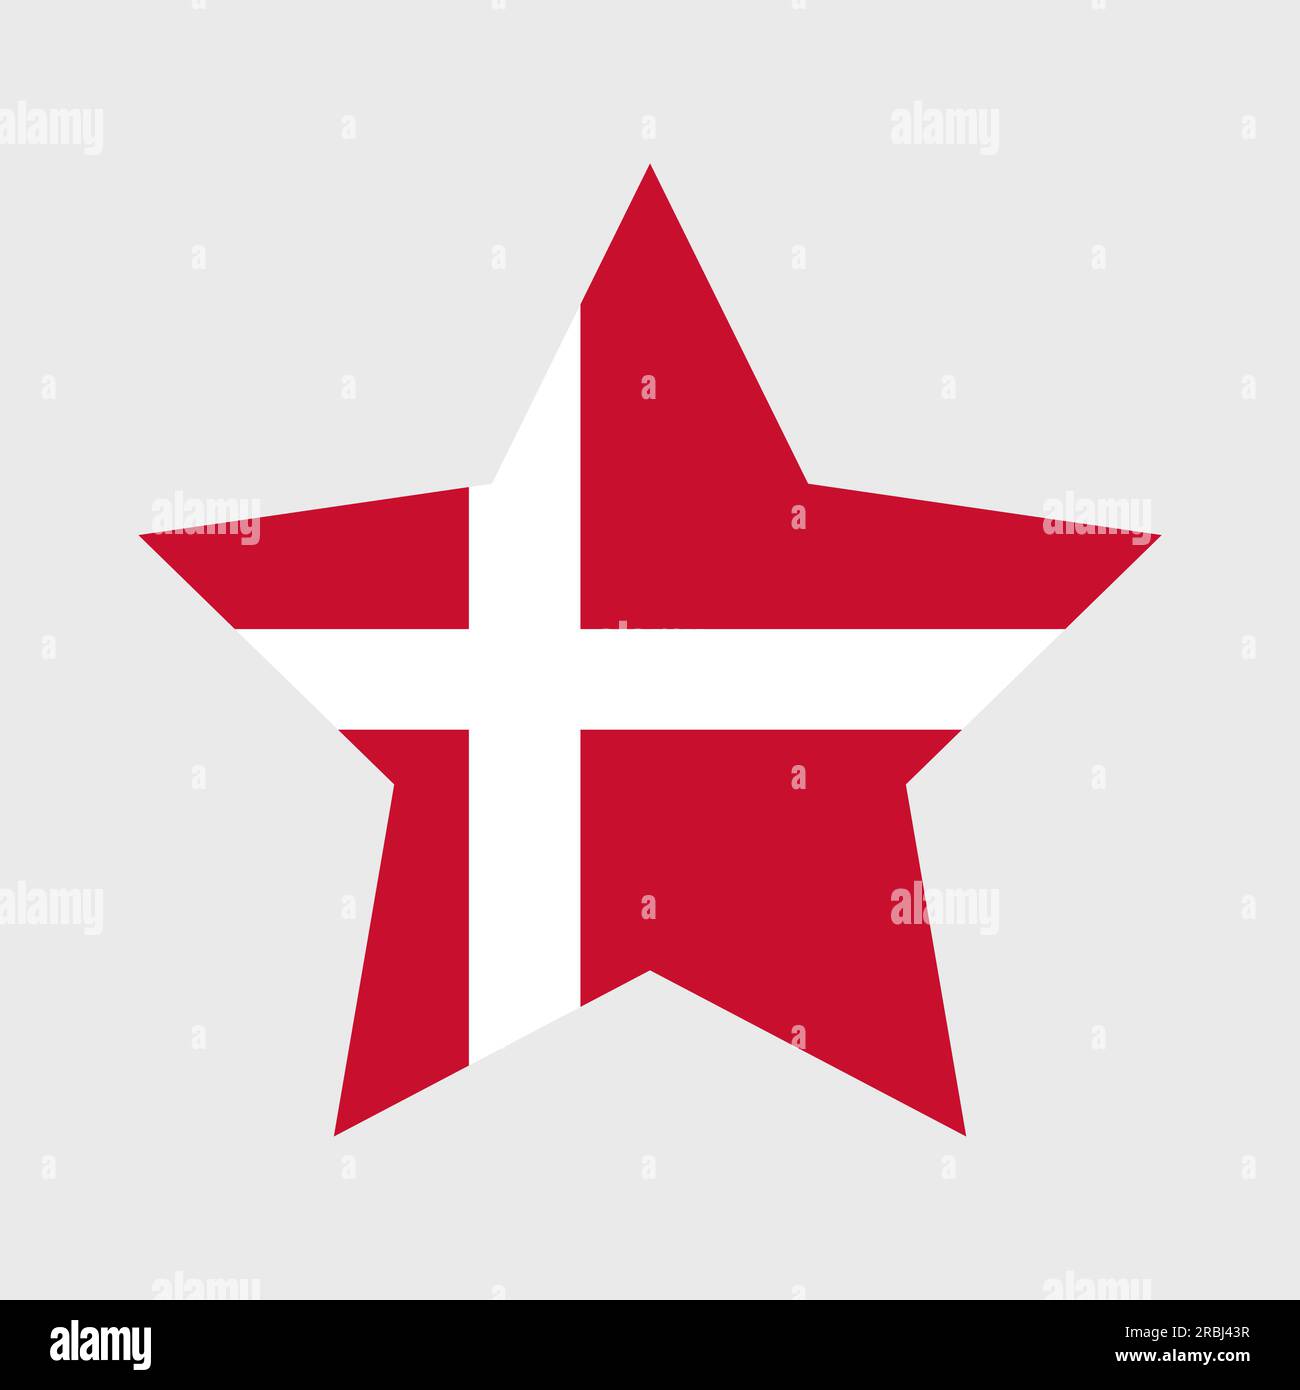 Denmark flag vector icons set in the shape of heart, star, circle and map. Stock Vector